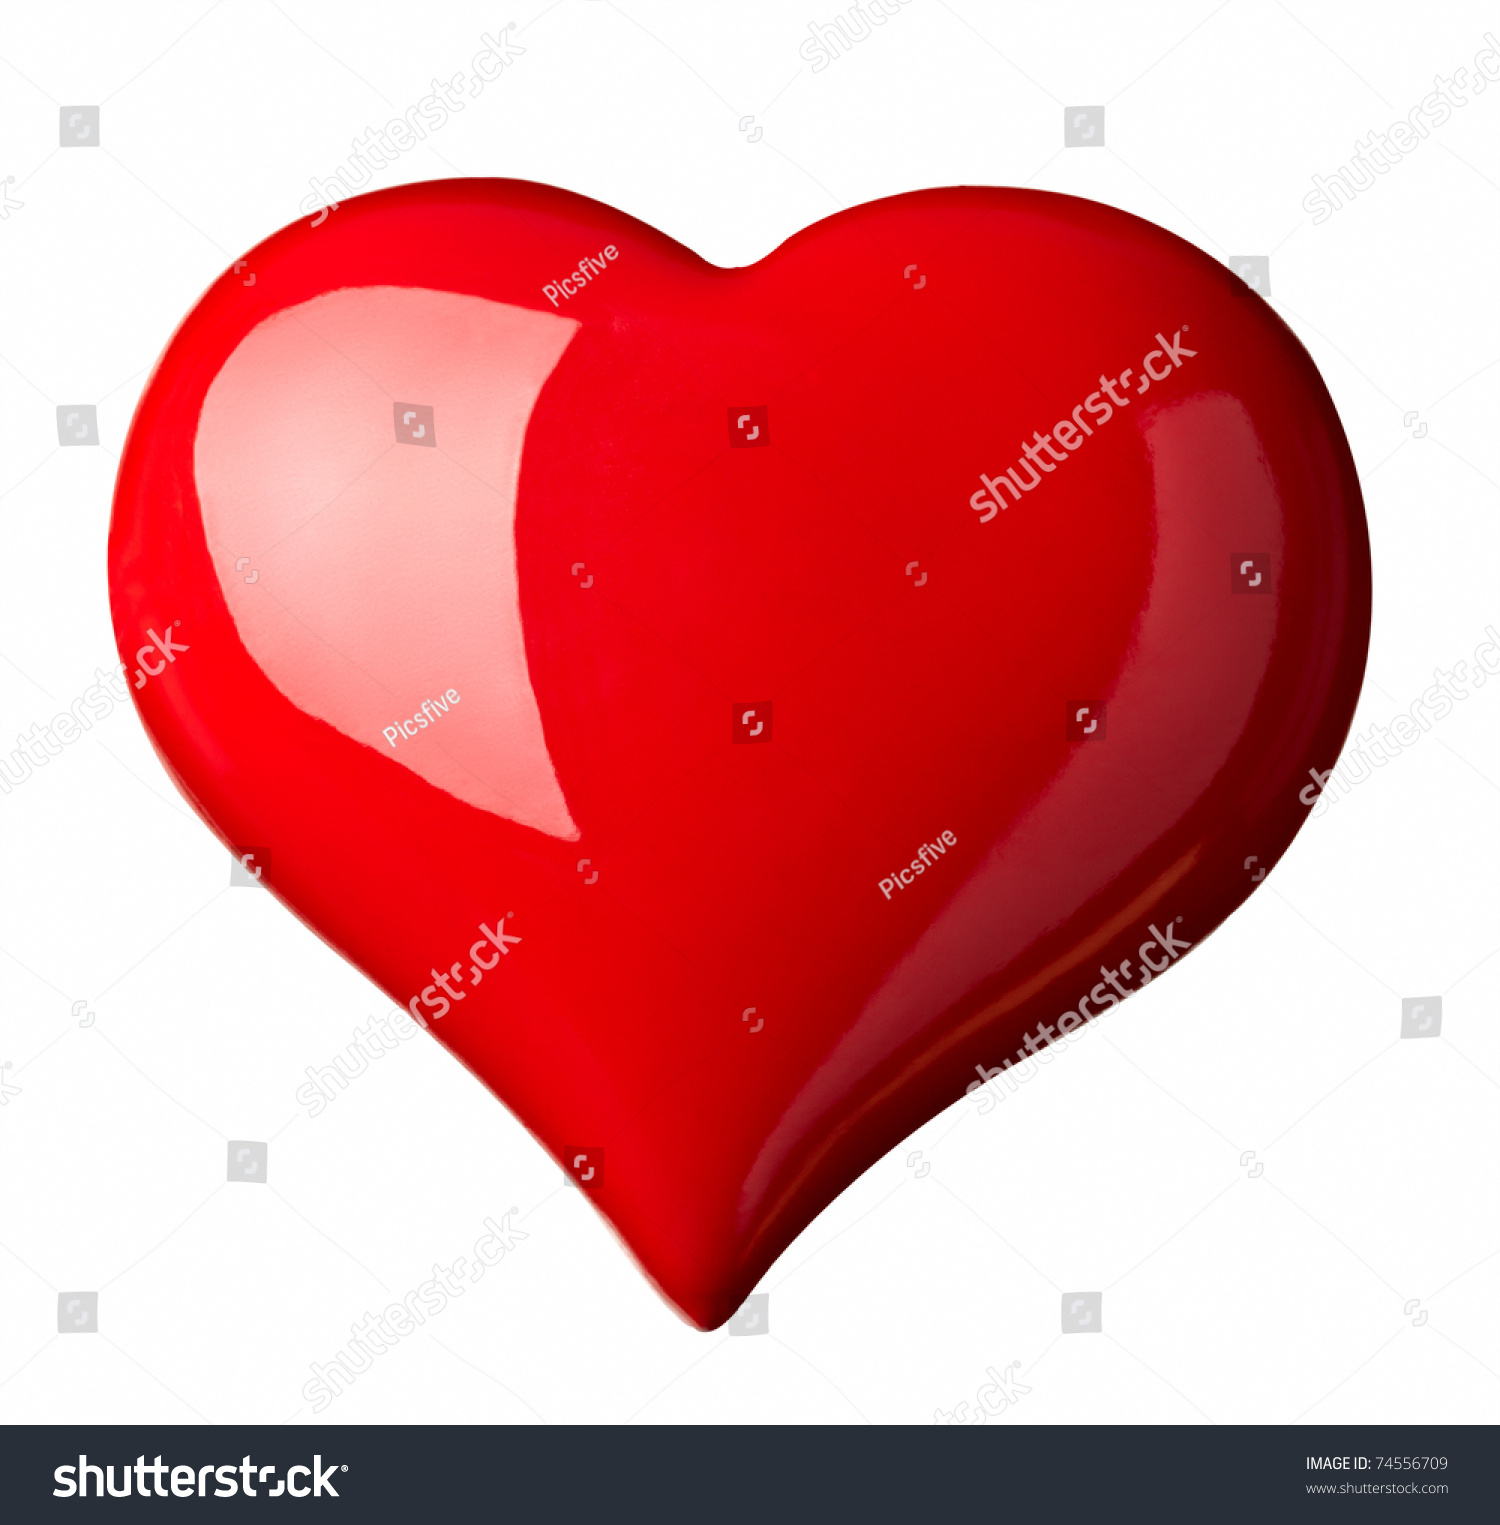 close up red heart shape symbol on white background with clipping path #74556709